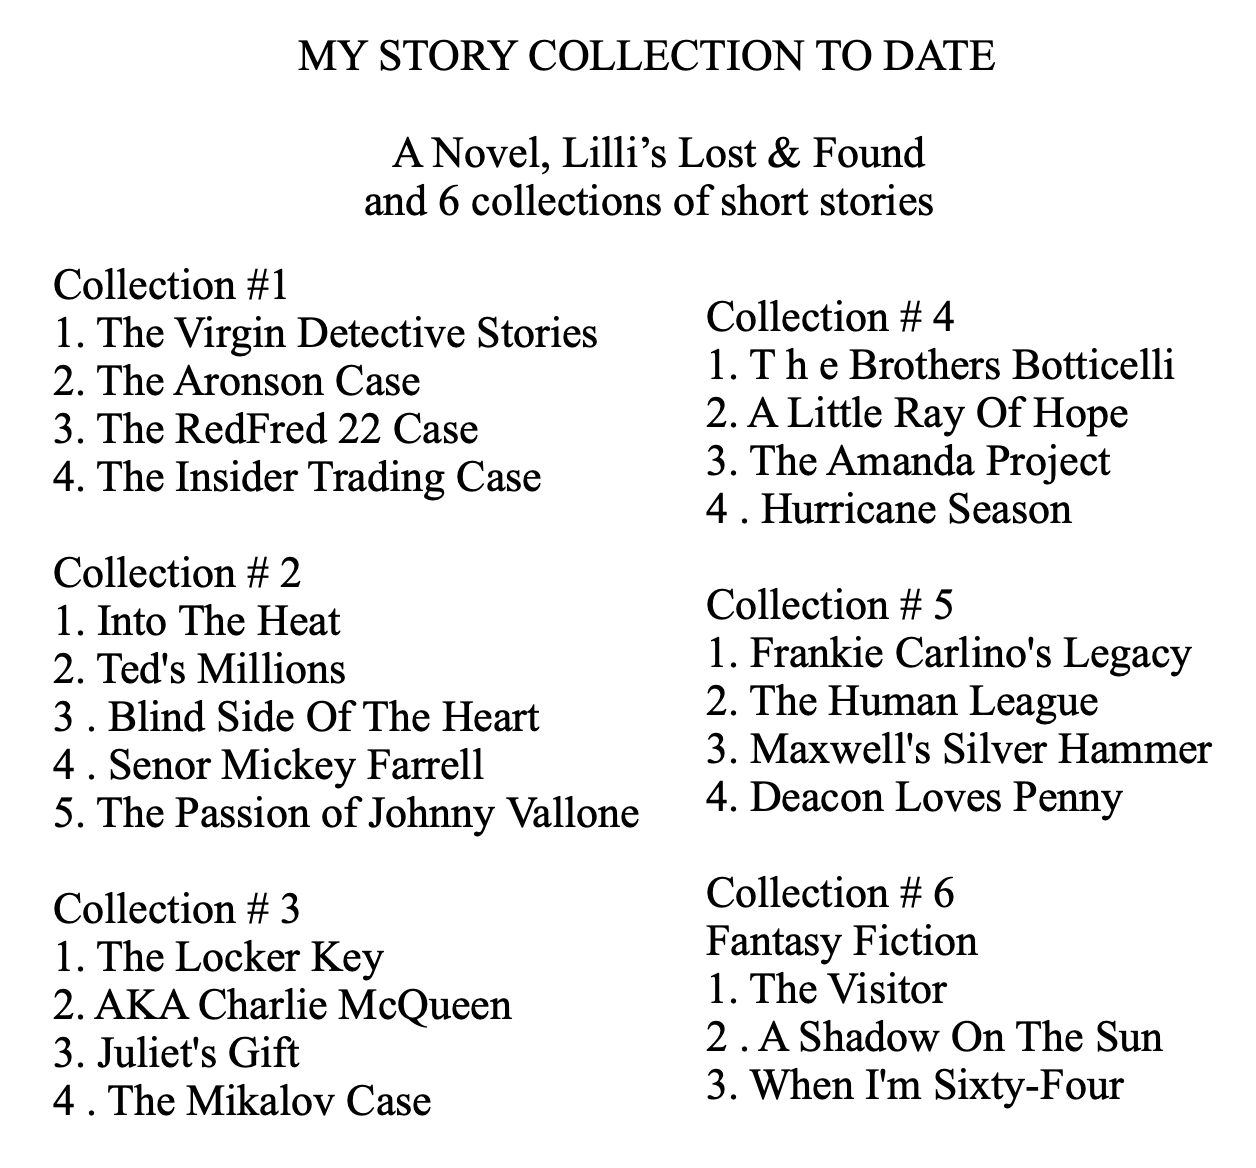 MY STORY COLLECTION TO DATE

A Novel, Lilli’s Lost &amp; Found
and 6 collections of short stories

Collection #1

1. The Virgin Detective Stories
2. The Aronson Case

3. The RedFred 22 Case

4. The Insider Trading Case

Collection # 2

1. Into The Heat

2. Ted's Millions

3. Blind Side Of The Heart

4 . Senor Mickey Farrell

5S. The Passion of Johnny Vallone

Collection # 3

1. The Locker Key

2. AKA Charlie McQueen
3. Juliet's Gift

4 . The Mikalov Case

Collection # 4

1. T h e Brothers Botticelli
2. A Little Ray Of Hope

3. The Amanda Project

4 . Hurricane Season

Collection # 5

1. Frankie Carlino's Legacy
2. The Human League

3. Maxwell's Silver Hammer
4. Deacon Loves Penny

Collection # 6

Fantasy Fiction

1. The Visitor

2 . A Shadow On The Sun
3. When I'm Sixty-Four